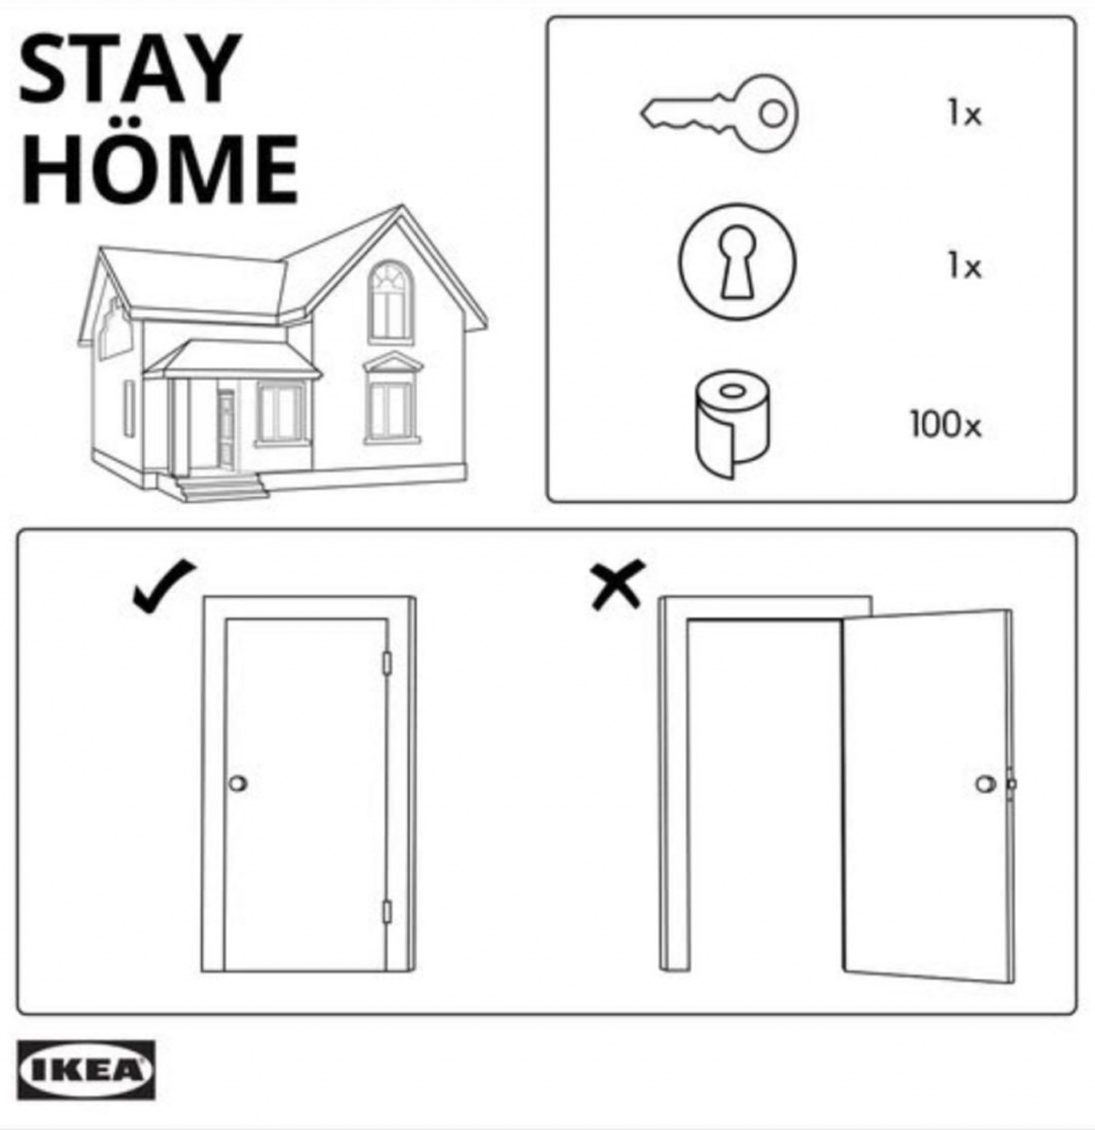 IKEA stay at home advert